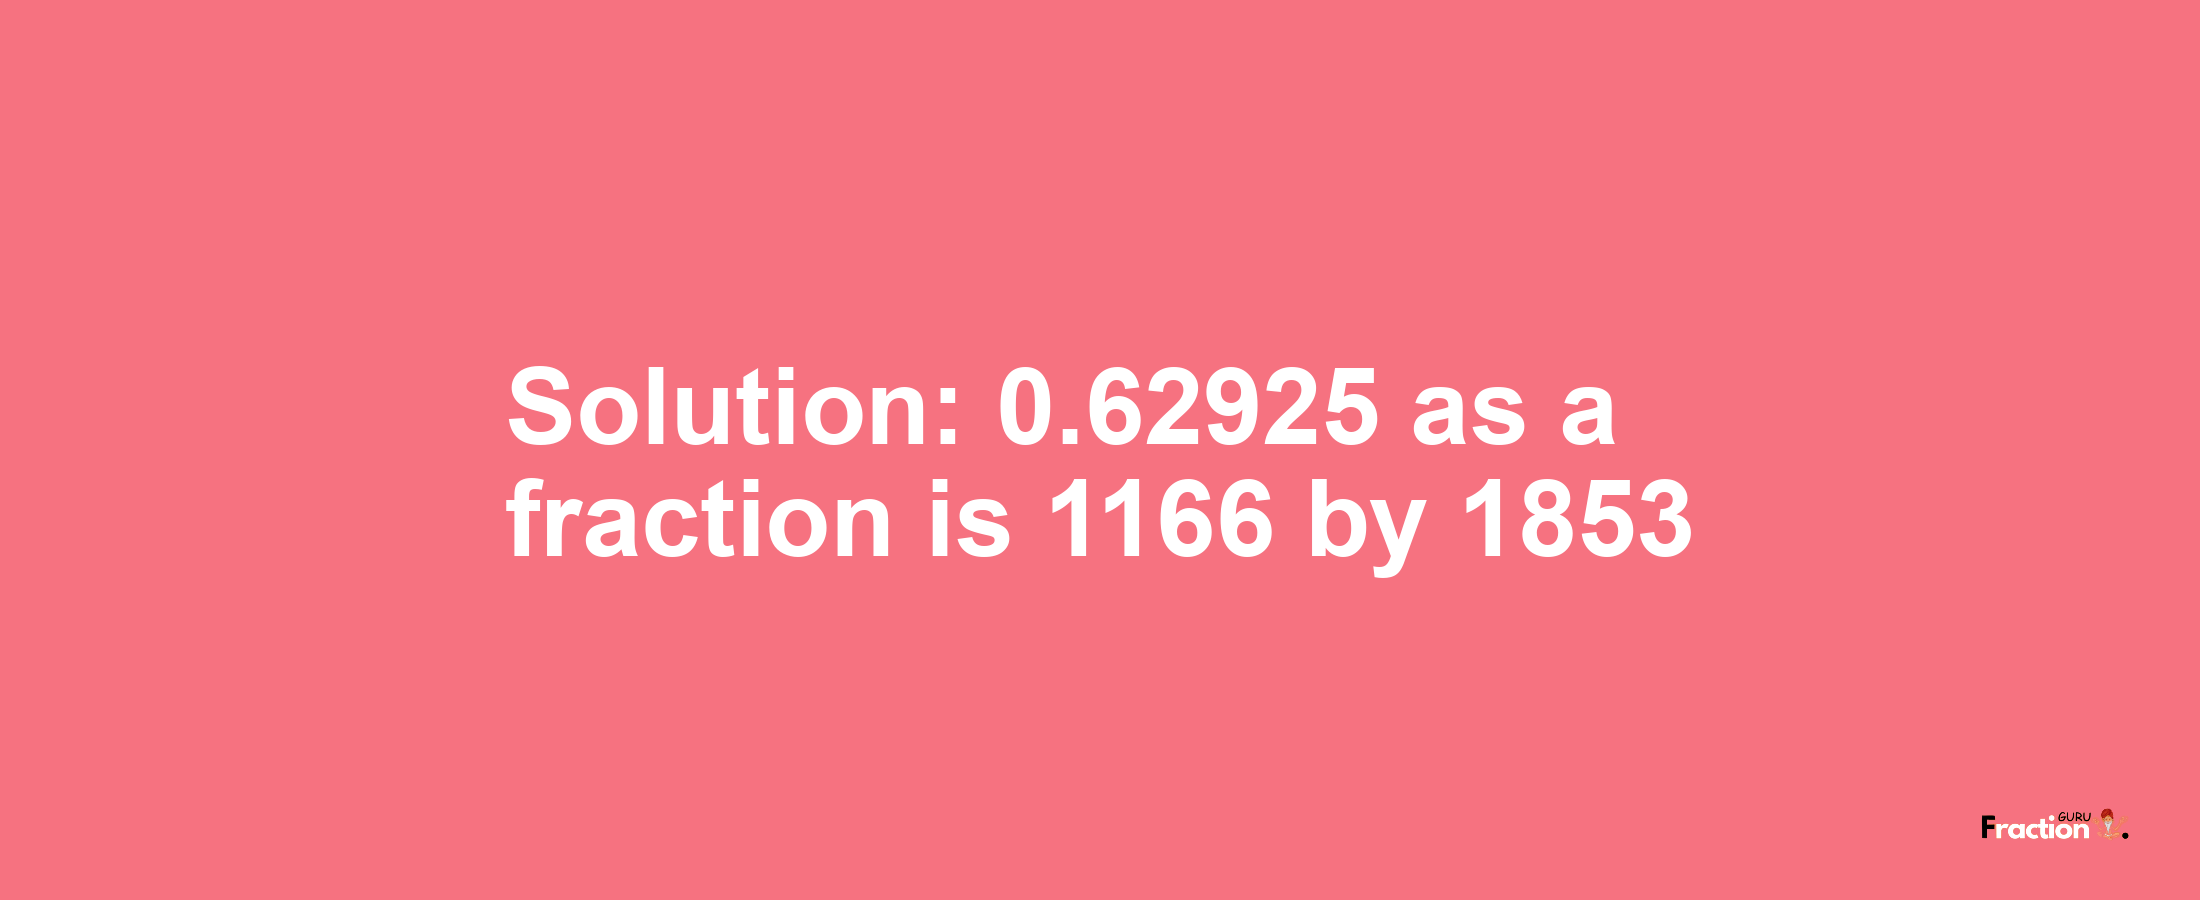 Solution:0.62925 as a fraction is 1166/1853